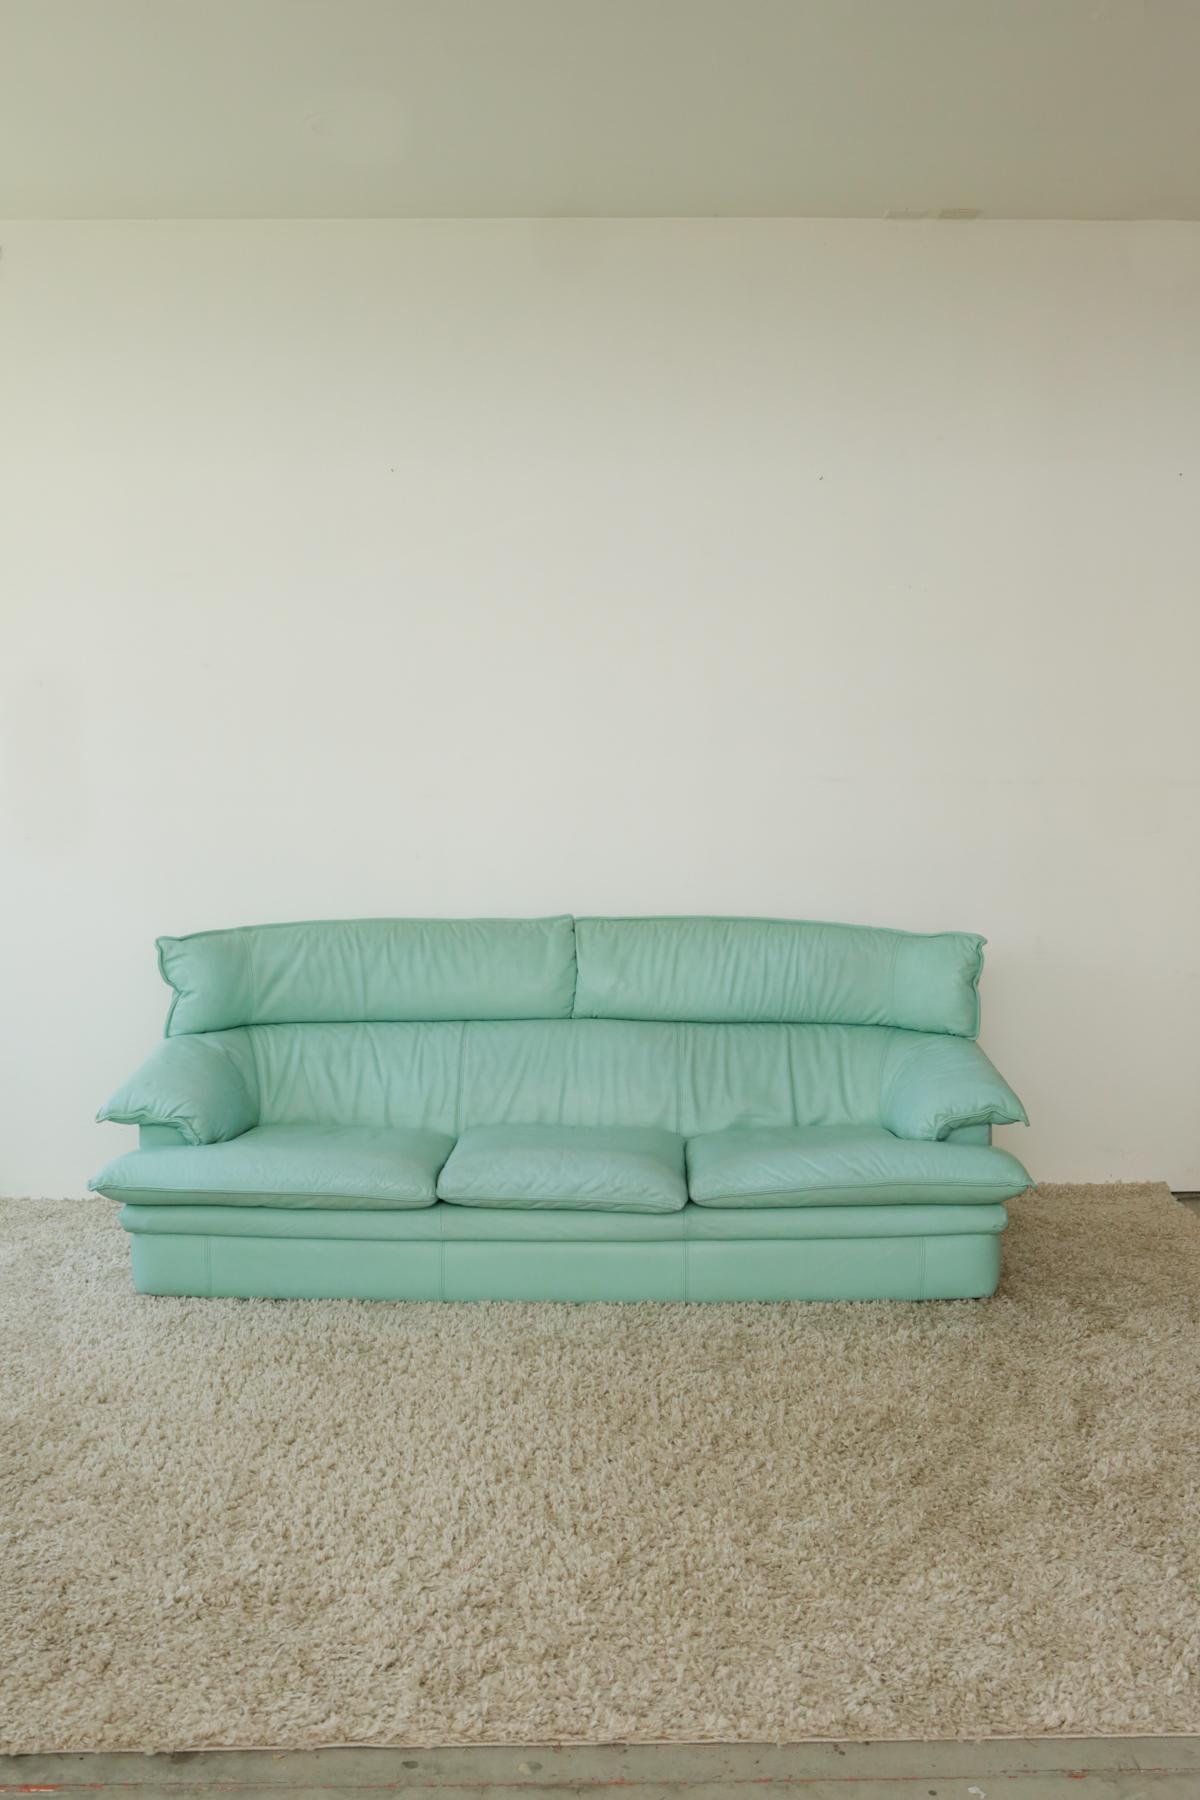 1970s Mint leather 3 seater sofa by Monaco Furniture Nicoletti Italia

A timeless piece that features an ergonomic design with mint Italian Leather, making the sofa both unique and physically inviting. Seats up to 3 people and perfect for